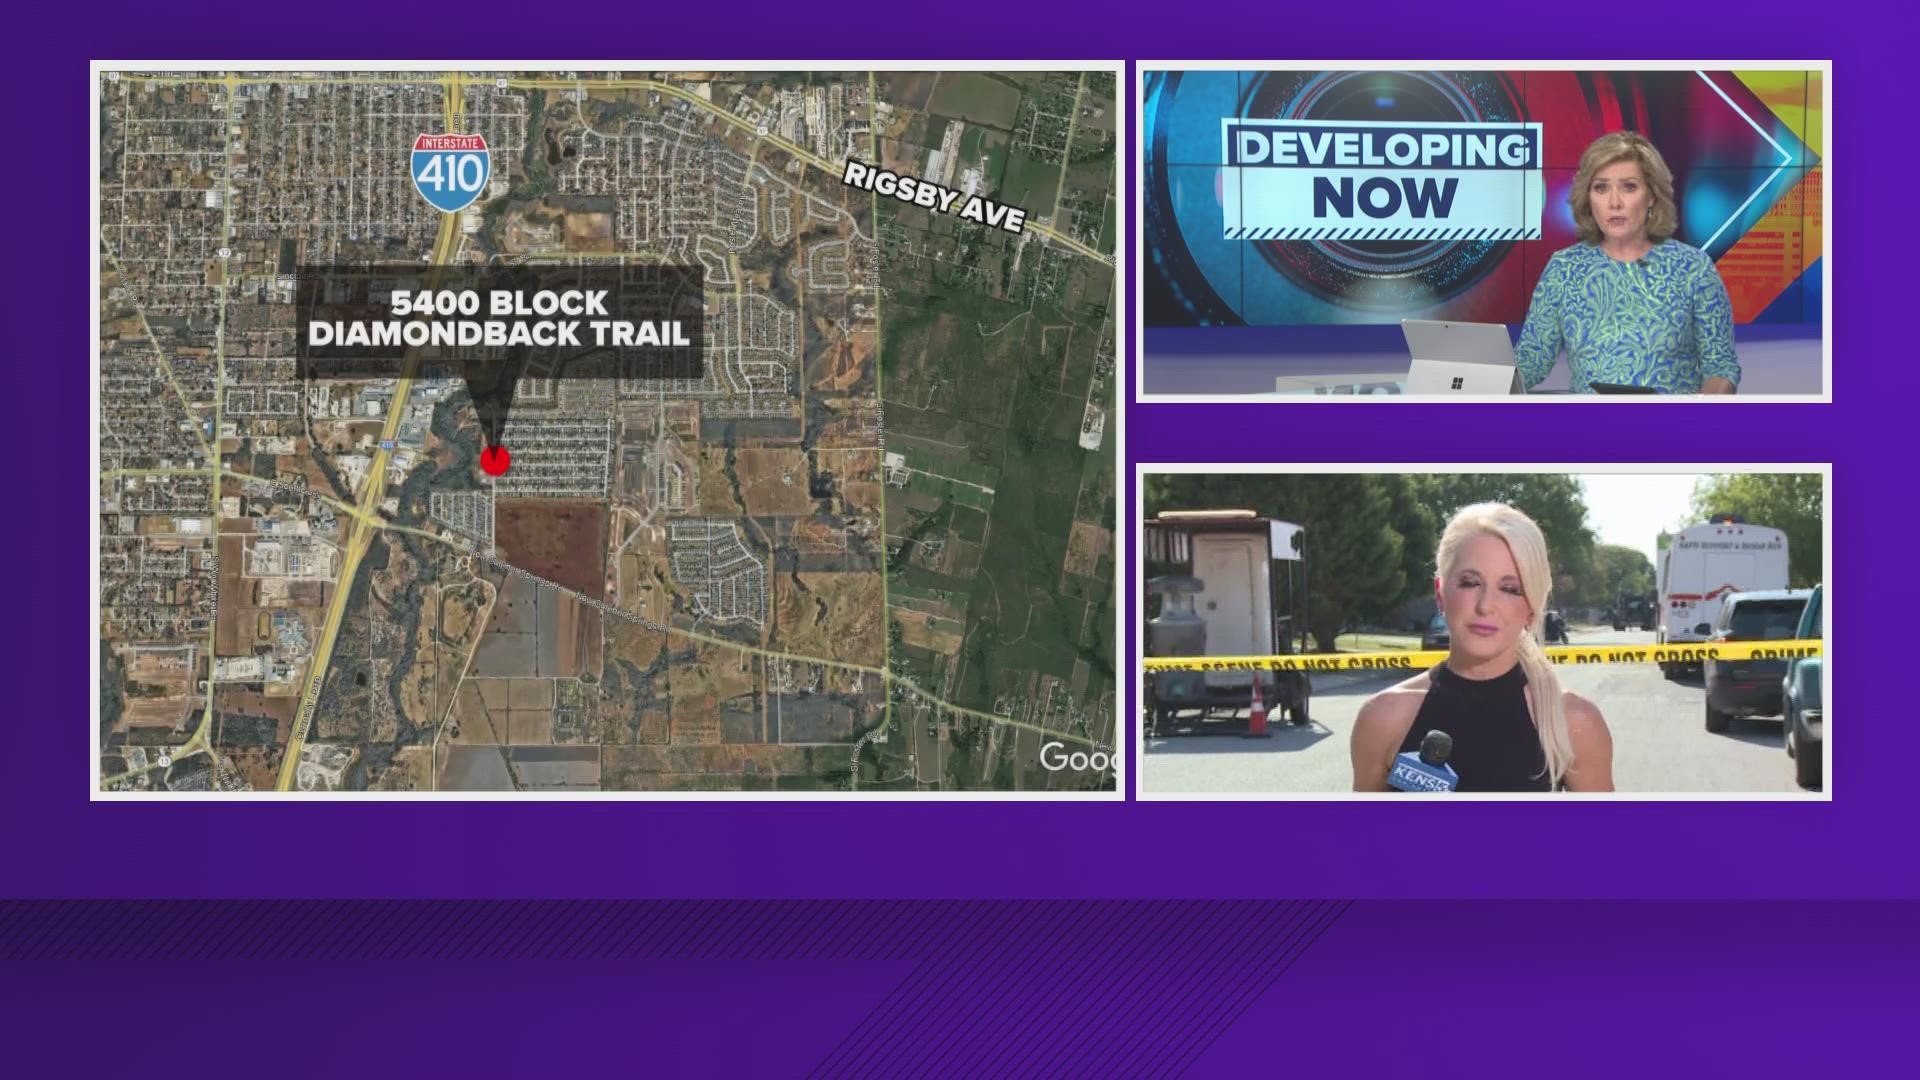 Police were called to the scene around 5:30 p.m. on Tuesday on Diamondback Trail.